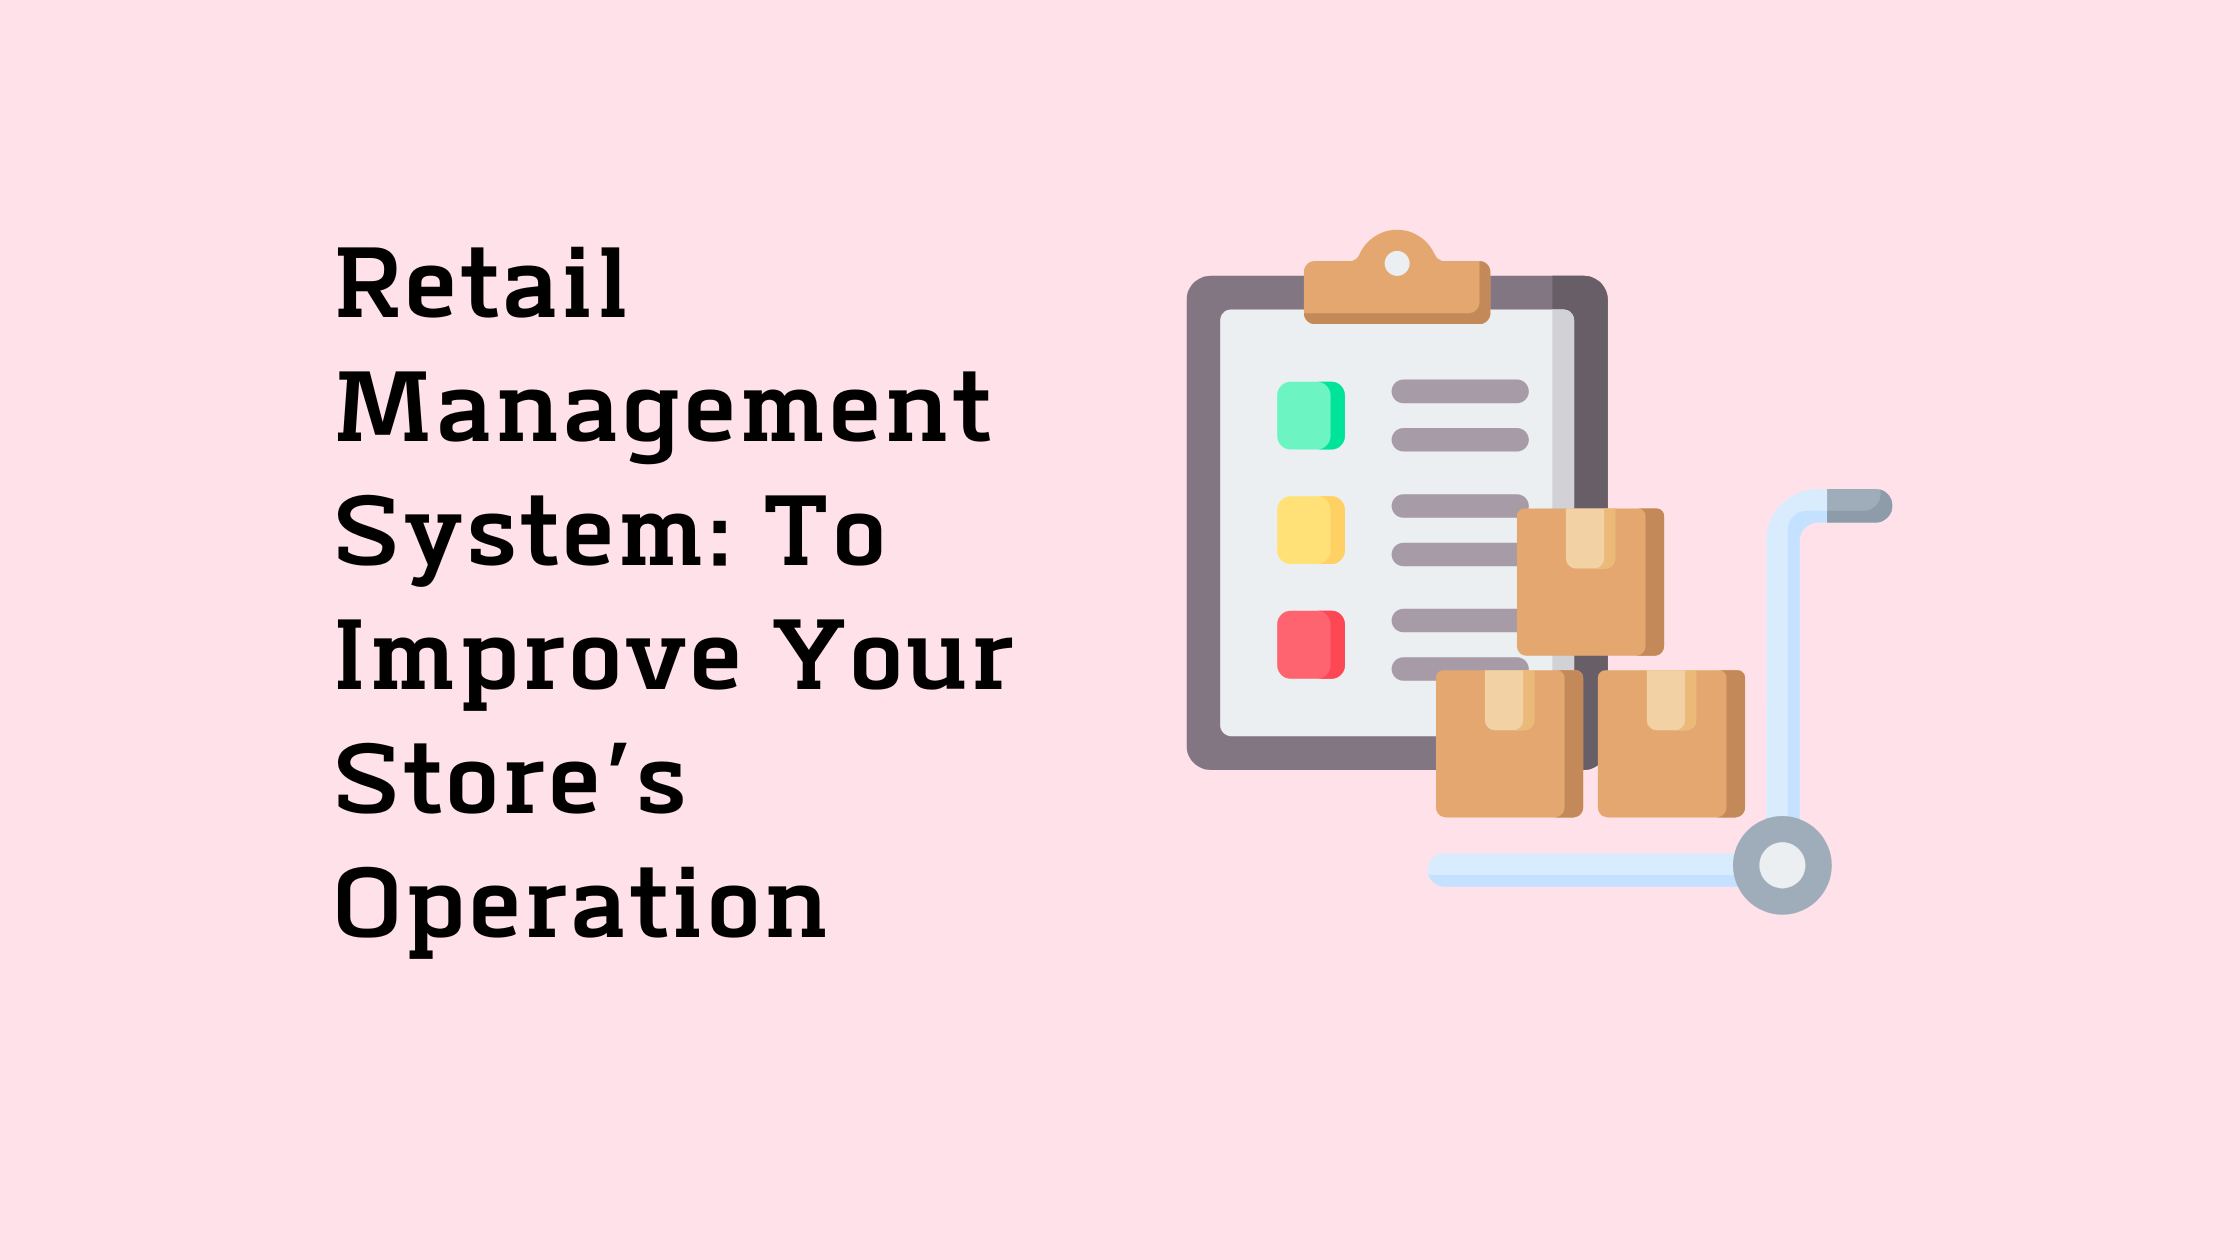 Retail Management System To Improve Your Store’s Operation